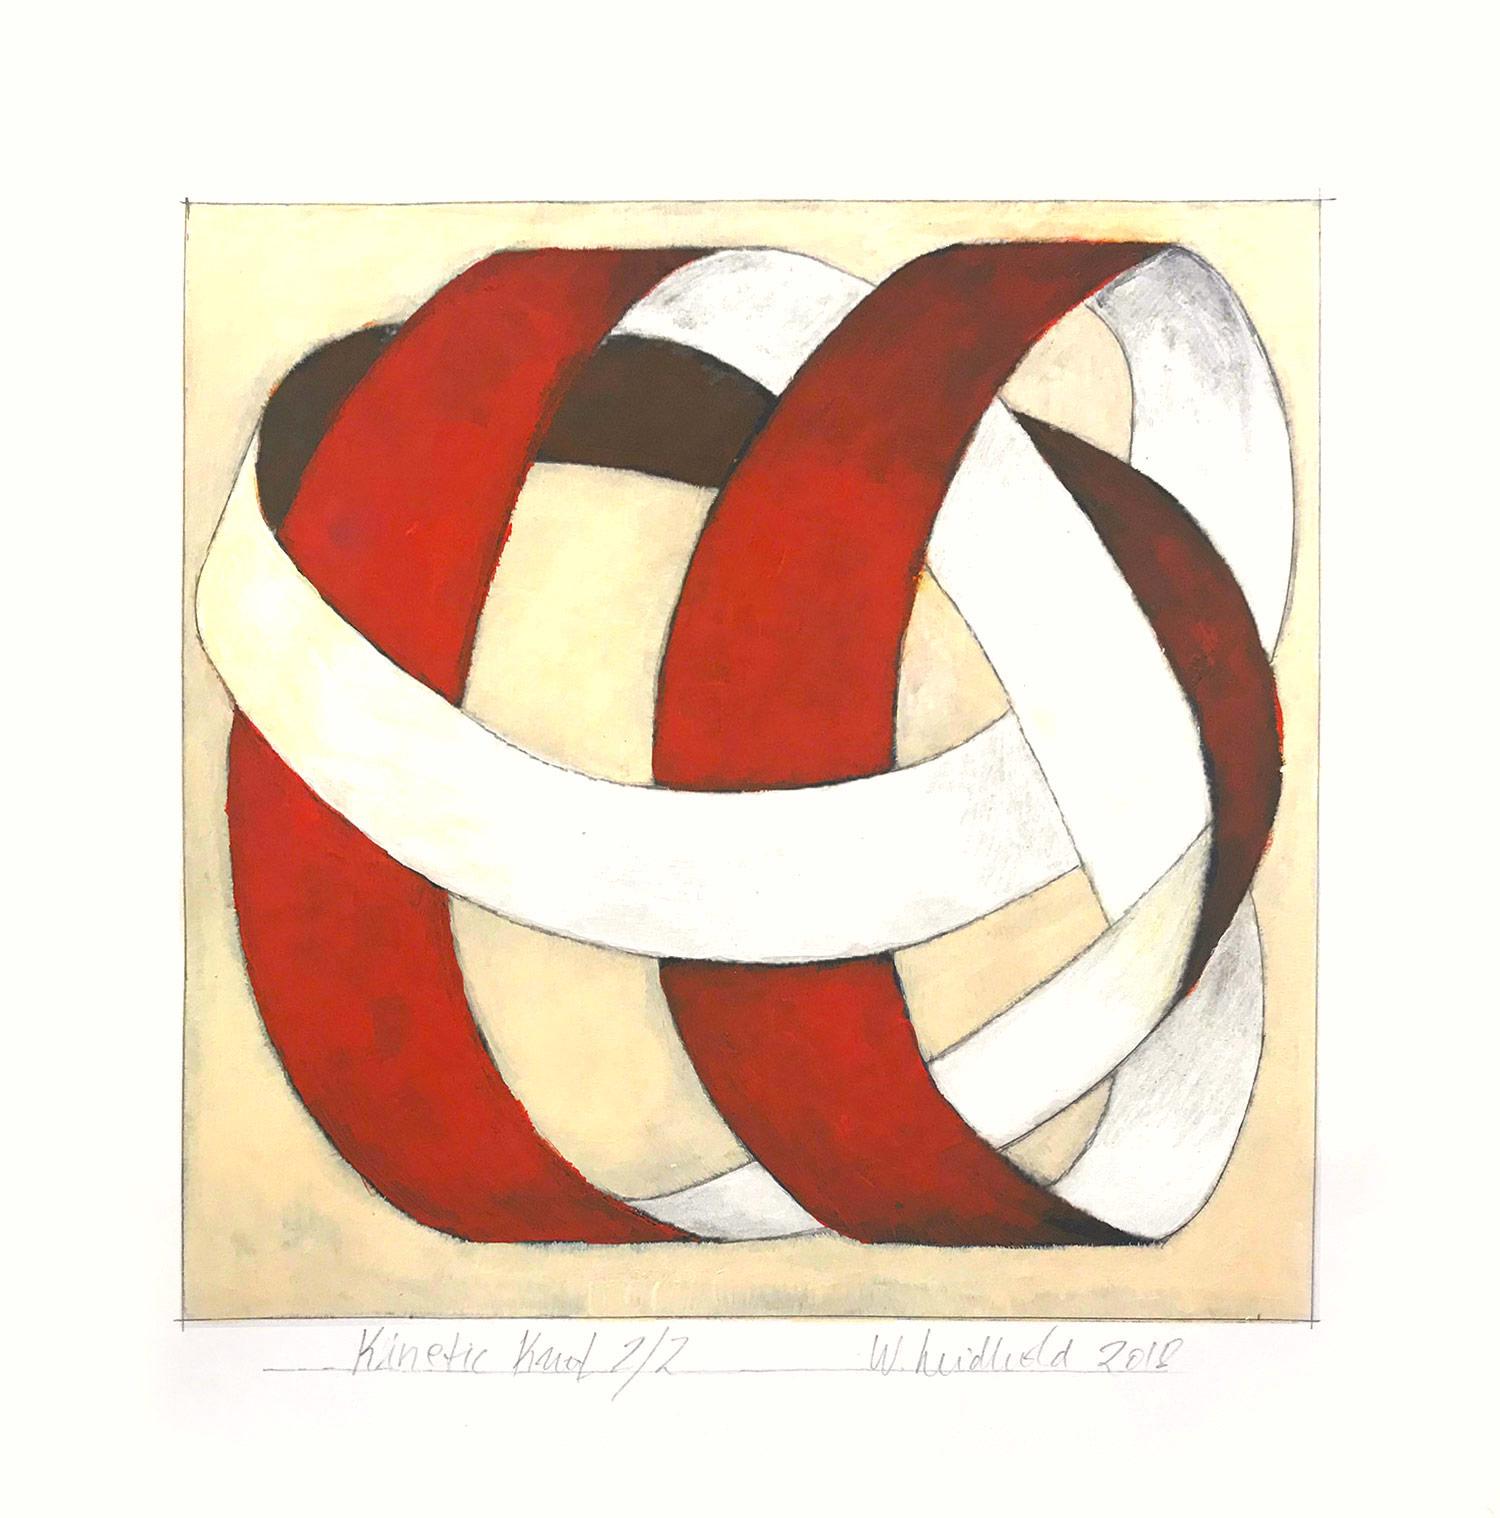 Wolfgang Leidhold Figurative Painting - "Kinetic Knot No. 2/2" Abstract Representational Knot Painting Work on Paper